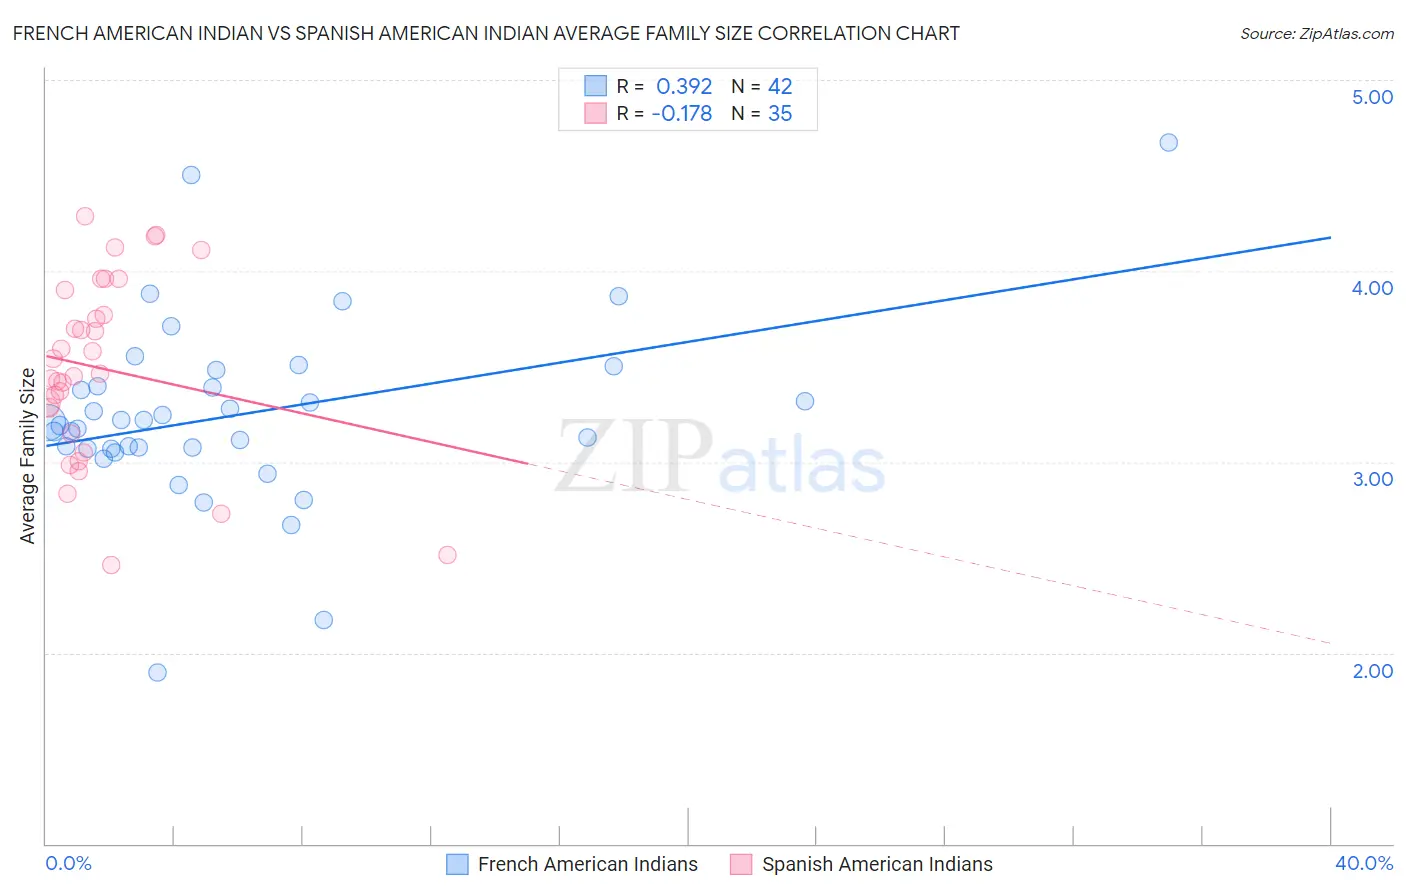 French American Indian vs Spanish American Indian Average Family Size